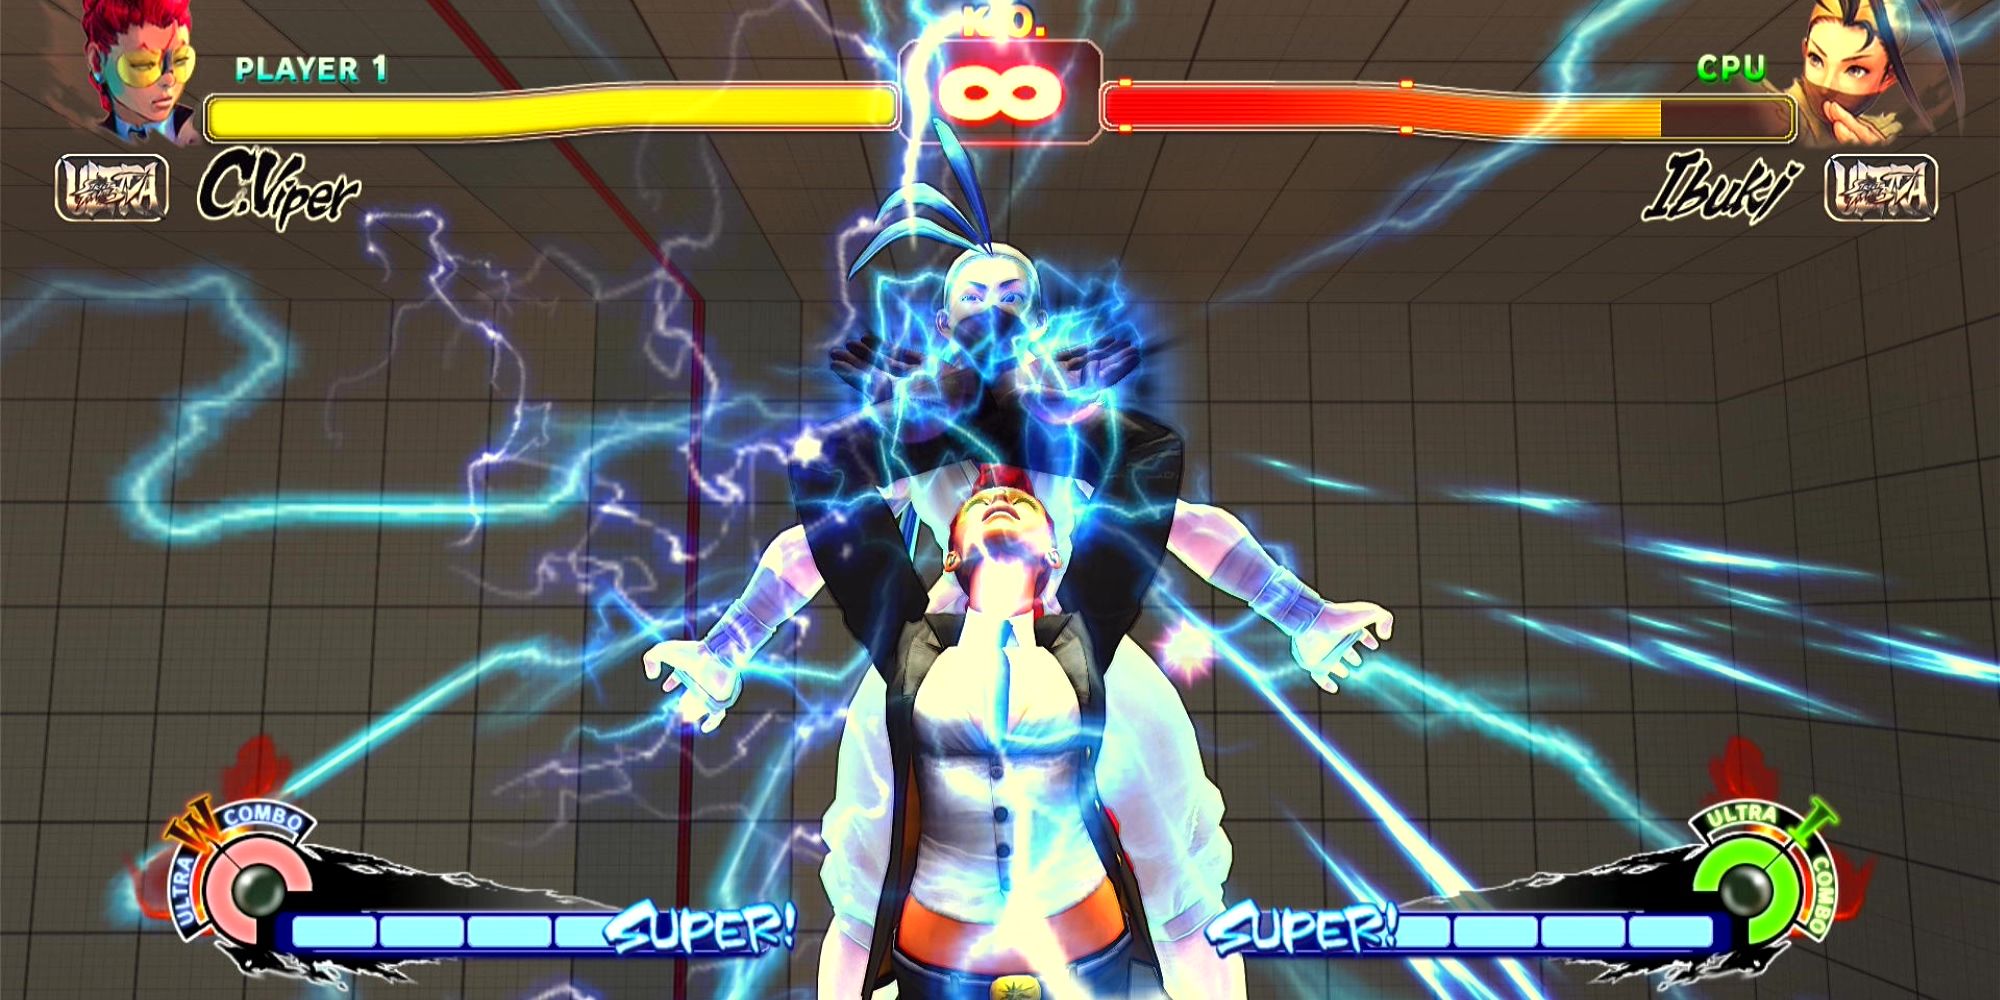 C Viper shocks Ibuki with her Burning Dance Ultra Combo in a battle at the Training Stage. Ultra Street FIghter 4.